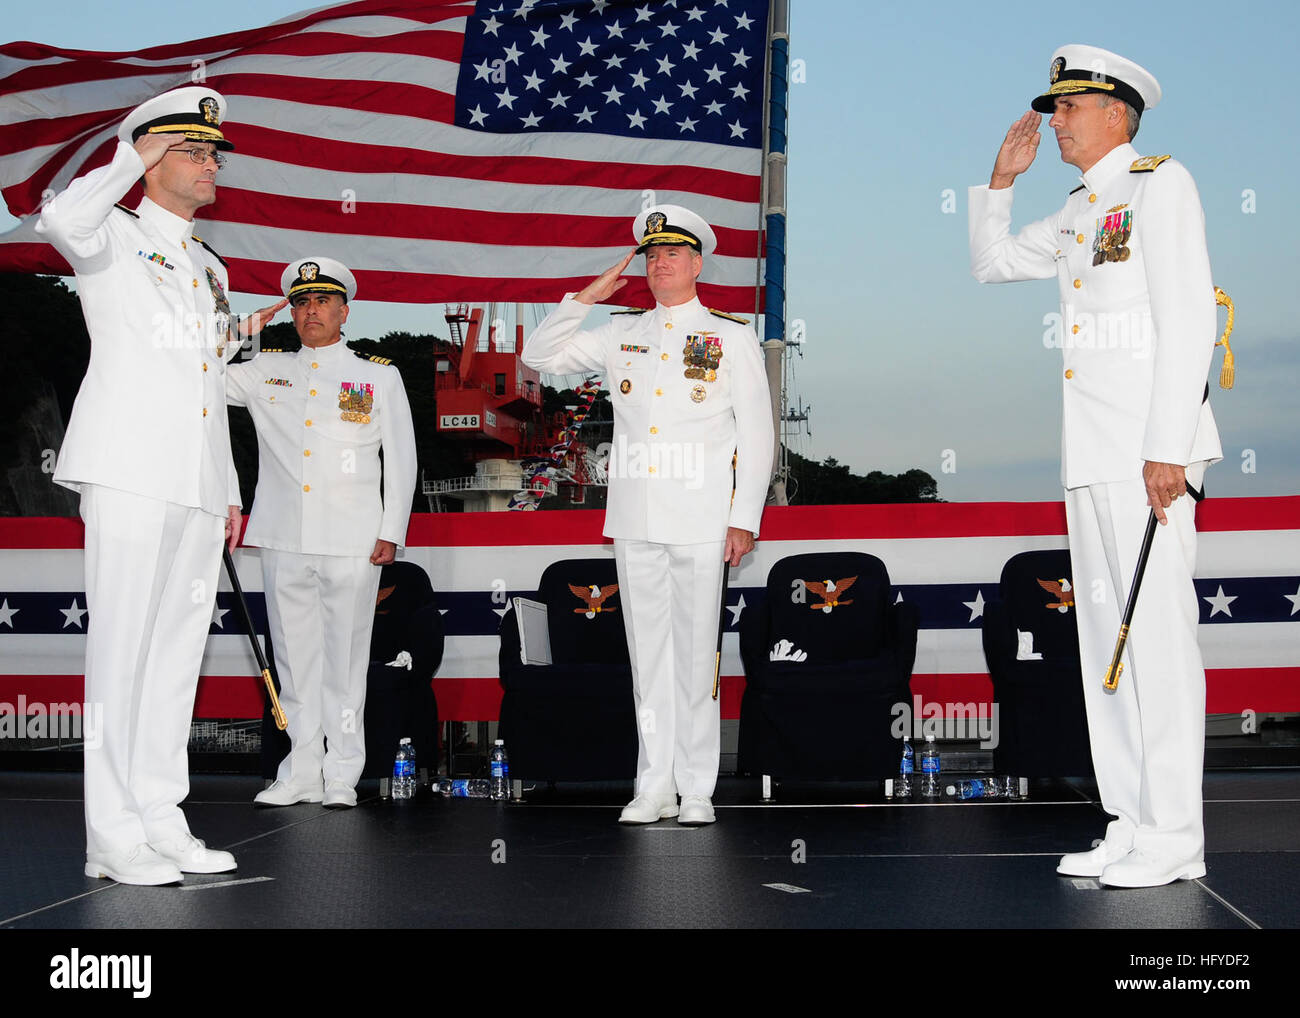 100910-N-5086M-271 YOKOSUKA, Japan (Sept. 10, 2010) Vice Adm. Scott R. Van Buskirk, right, relieves Vice Adm. John M. Bird as commander of U.S. 7th Fleet during a change of command ceremony a board the amphibious command ship command USS Blue ridge (LCC 19). Van Buskirk is the 47th commander of U.S. 7th Fleet. U.S. 7th Fleet is responsible for the largest area of the Navy's numbered fleets and operates in the western Pacific and Indian Oceans. (U.S. Navy photo by Mass Communication Specialist 2nd Class Gregory Mitchell/Released) US Navy 100910-N-5086M-271 Vice Adm. Scott R. Van Buskirk, right, Stock Photo